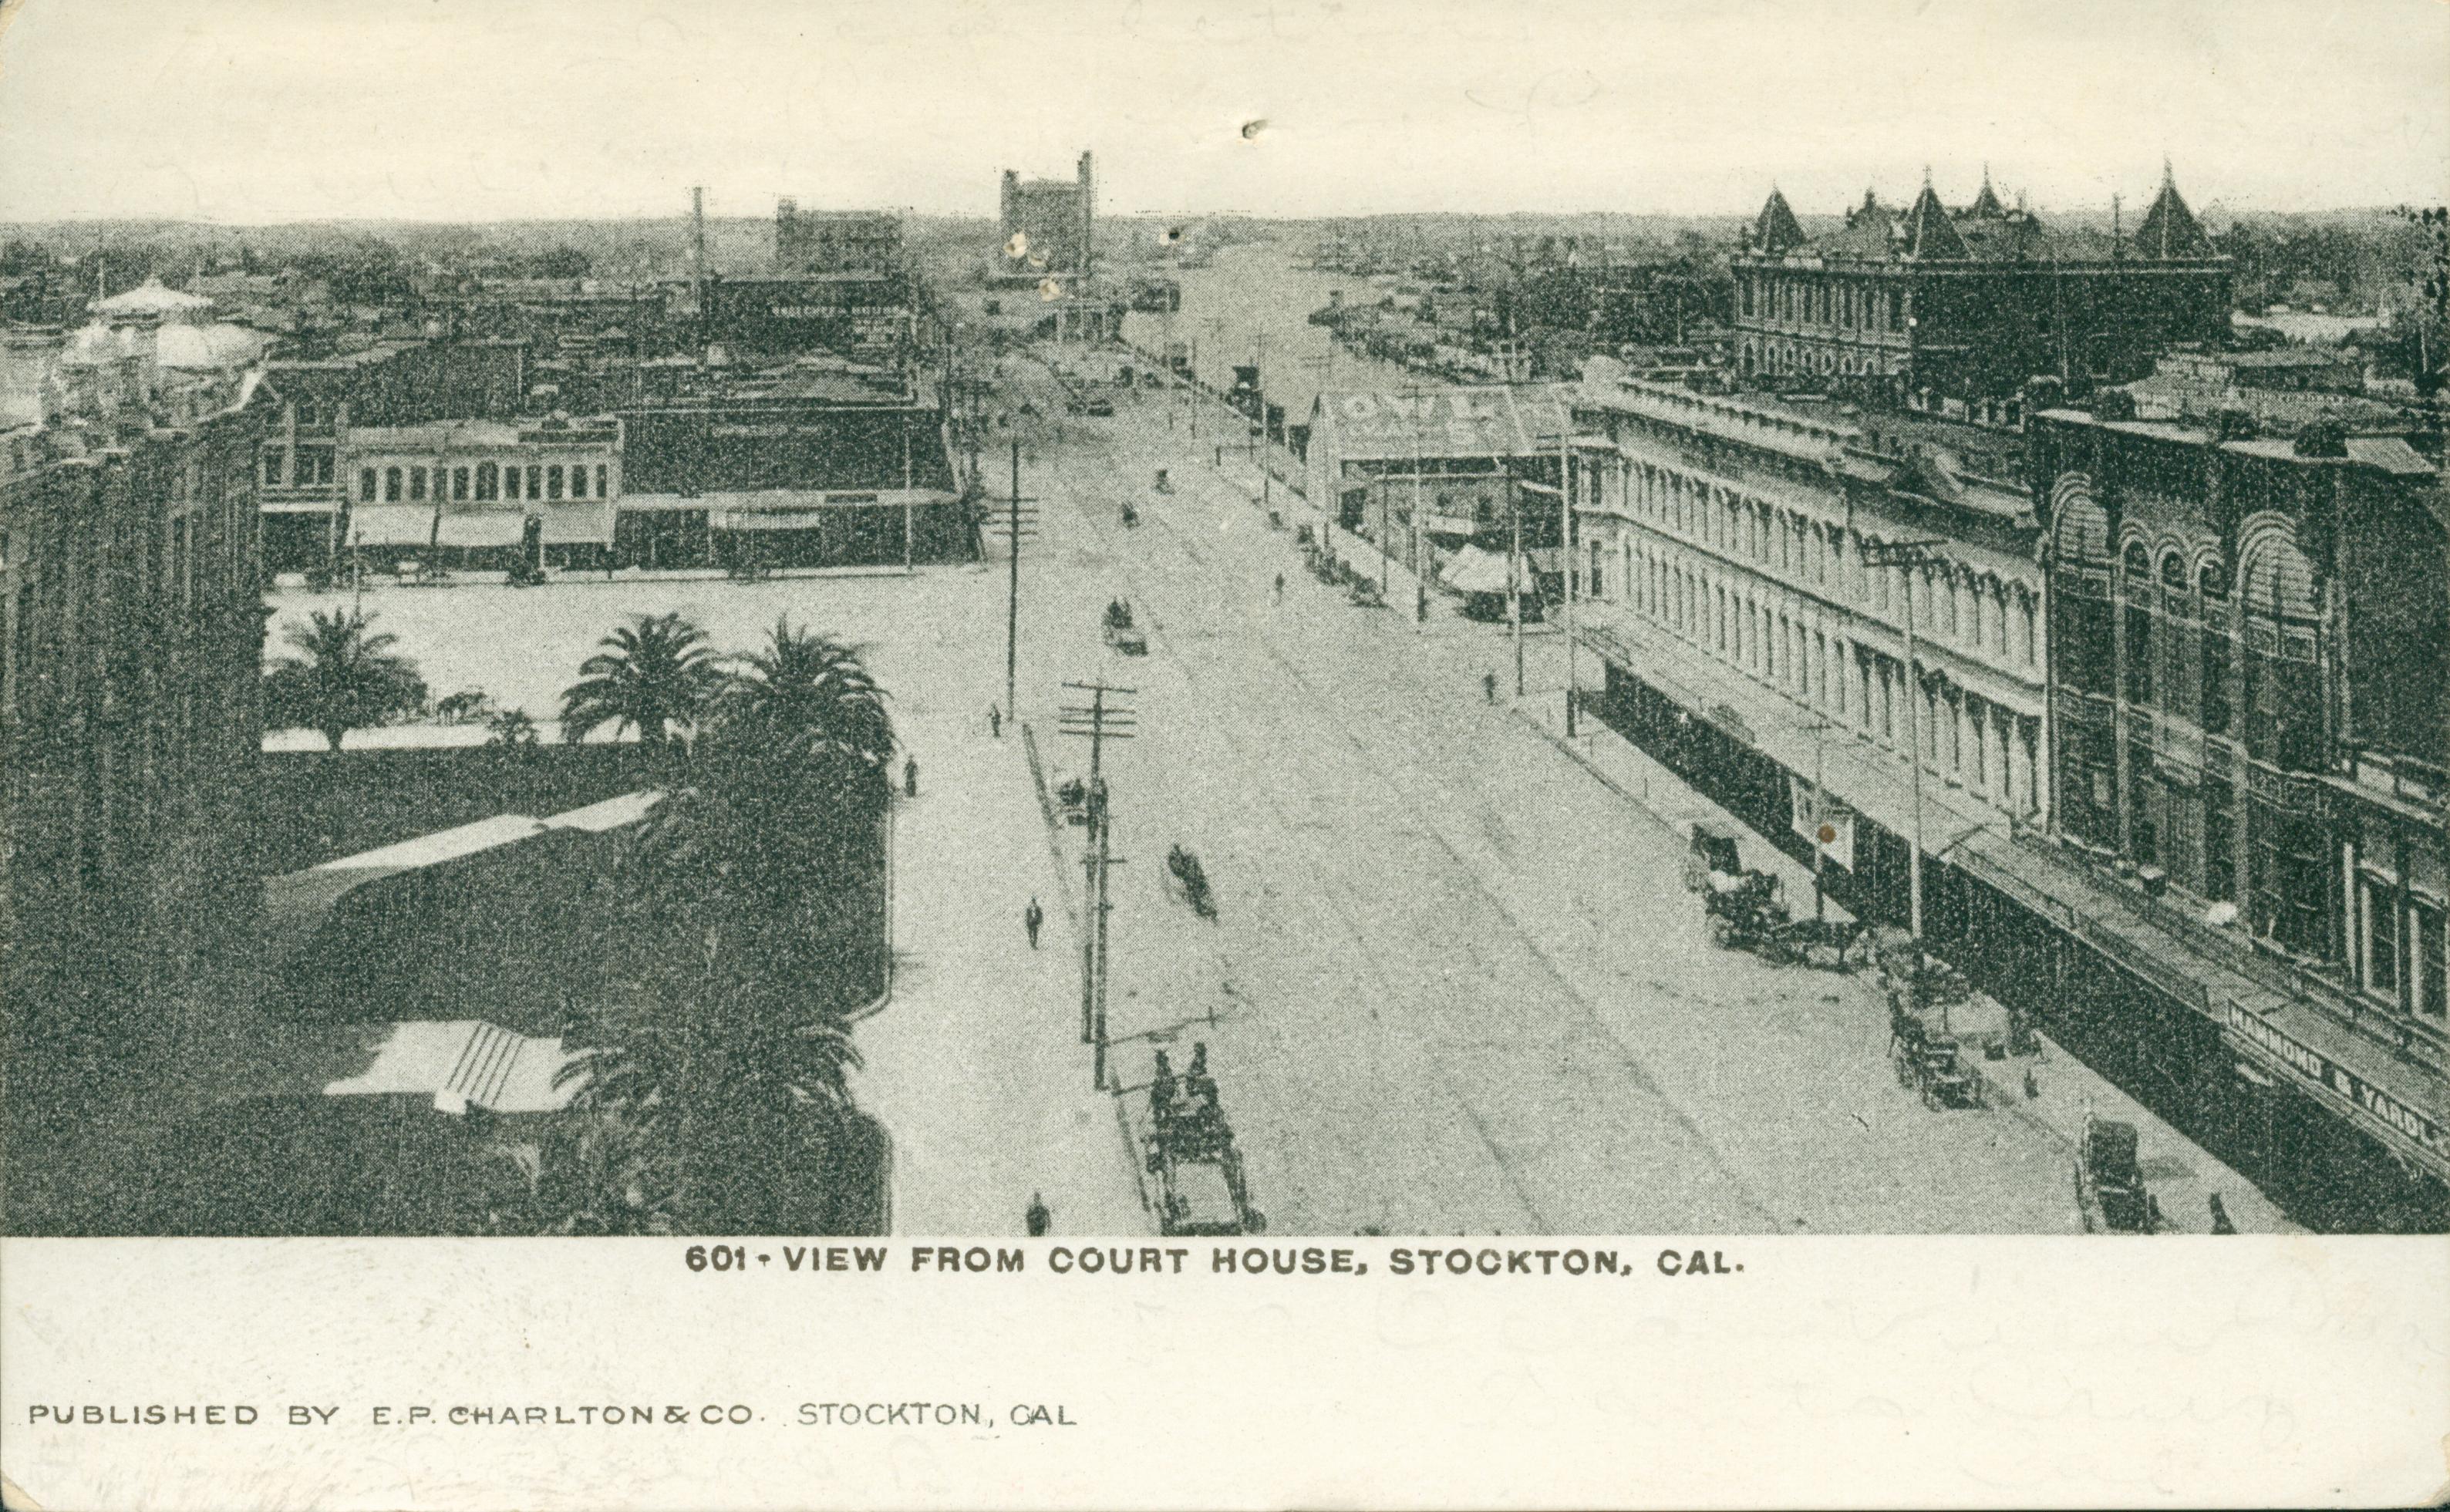 View of Stockton from the Court House, multiple story buildings